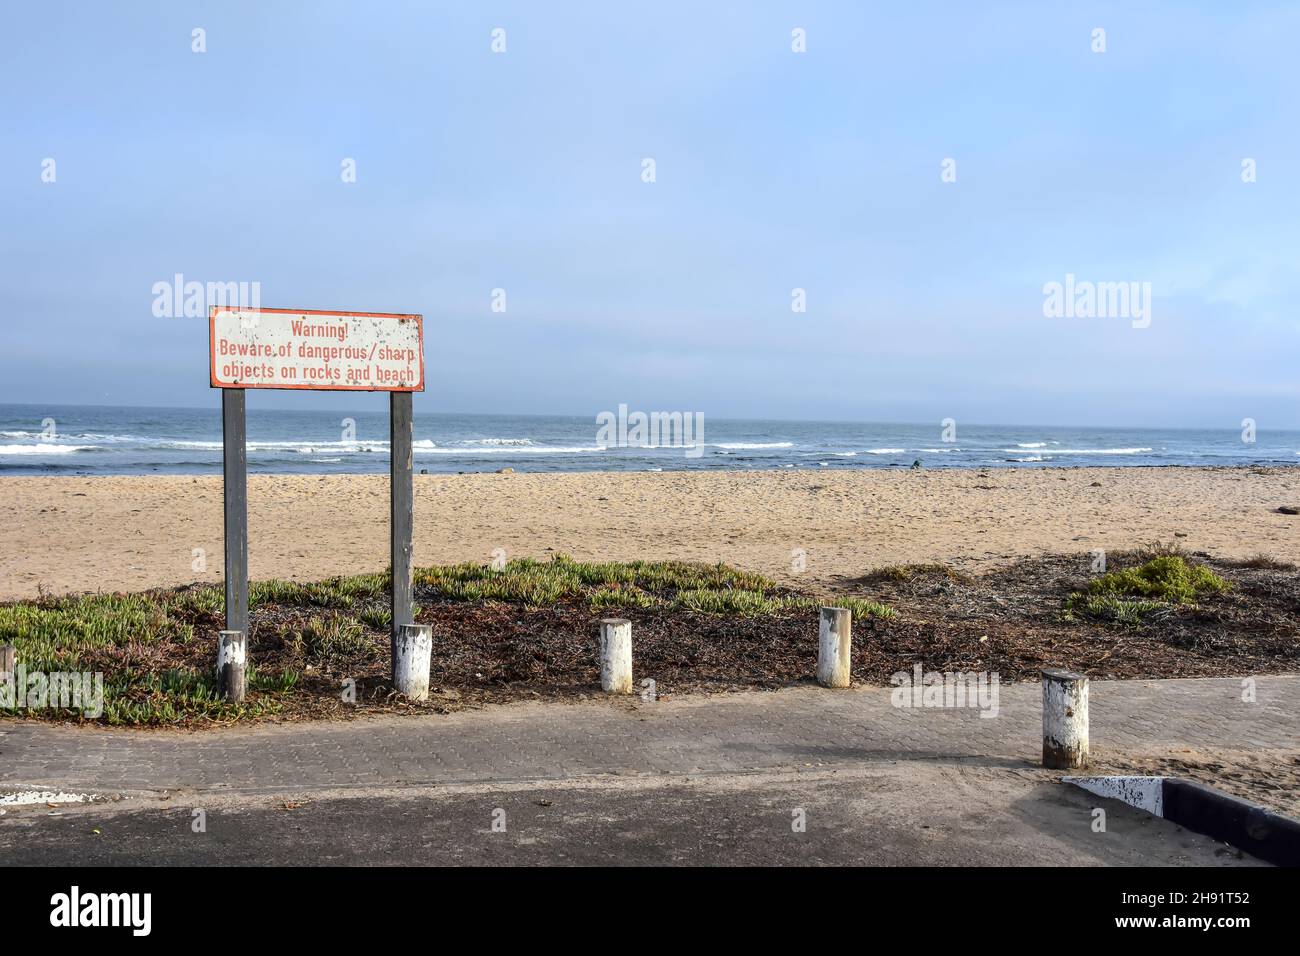 A sign in Swakopmund Namibia Southern Africa at the Atlantic Ocean warning about sharp and dangerous objects on sand and rocks at the beach Stock Photo